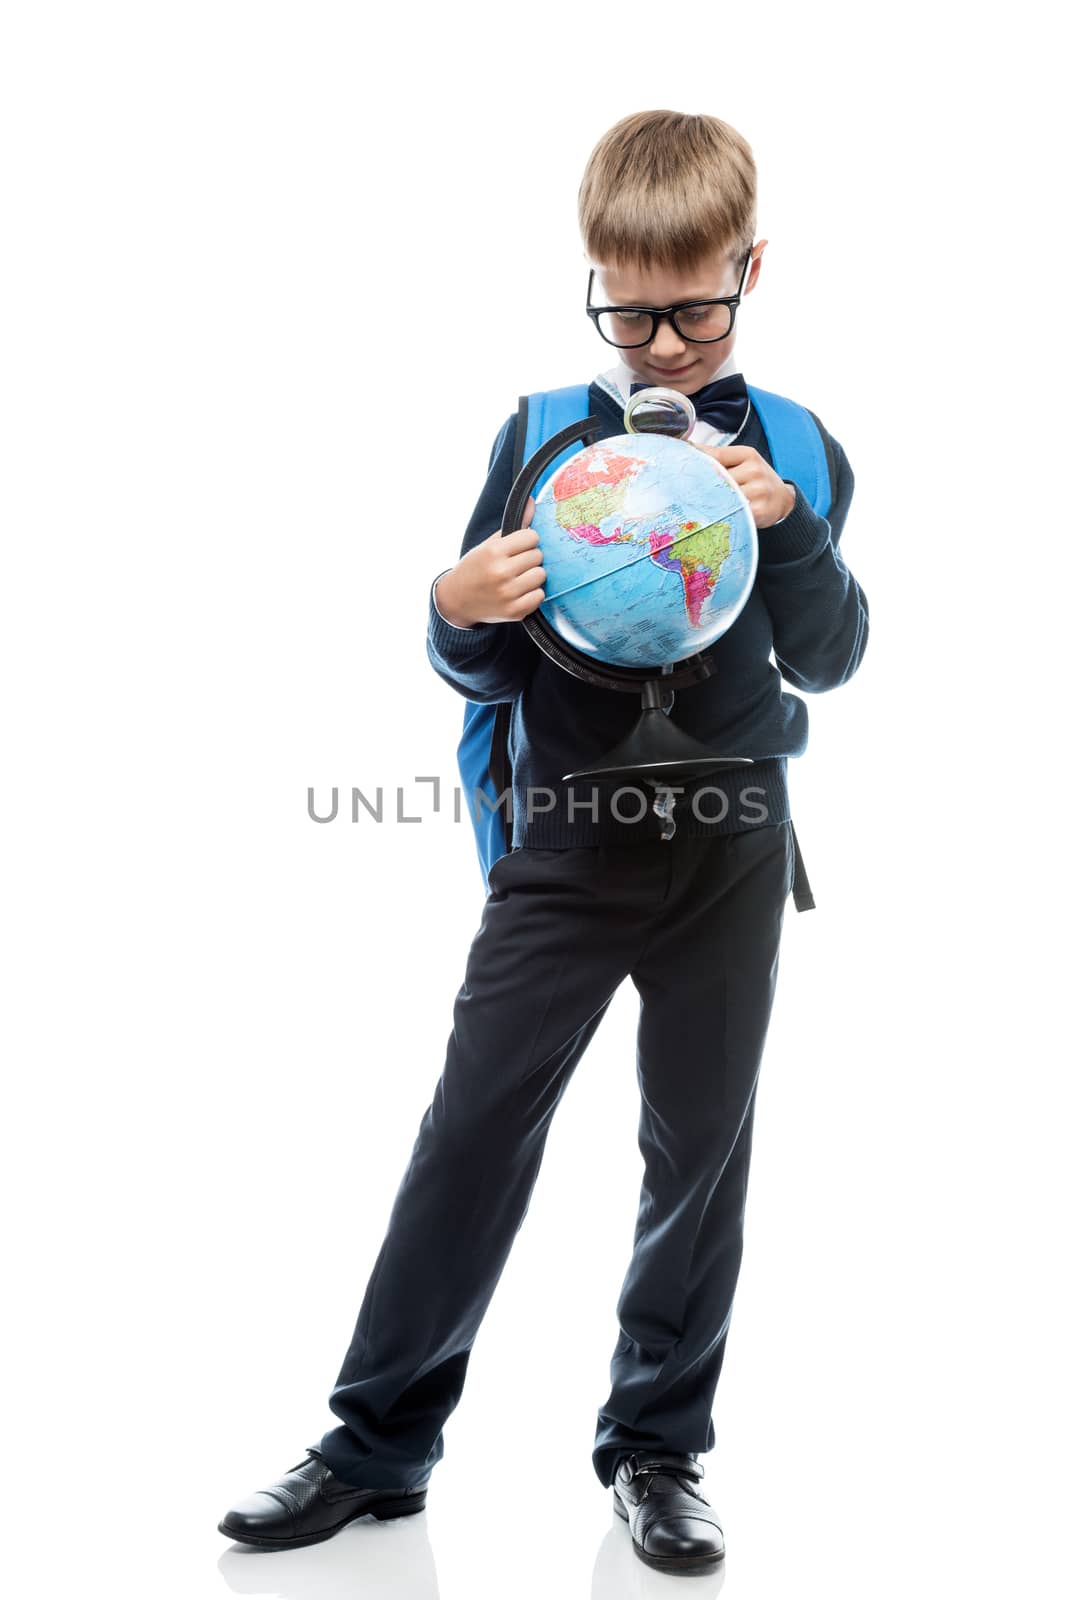 schoolboy examines through magnifier glass globe, portrait is isolated in full length on a white background